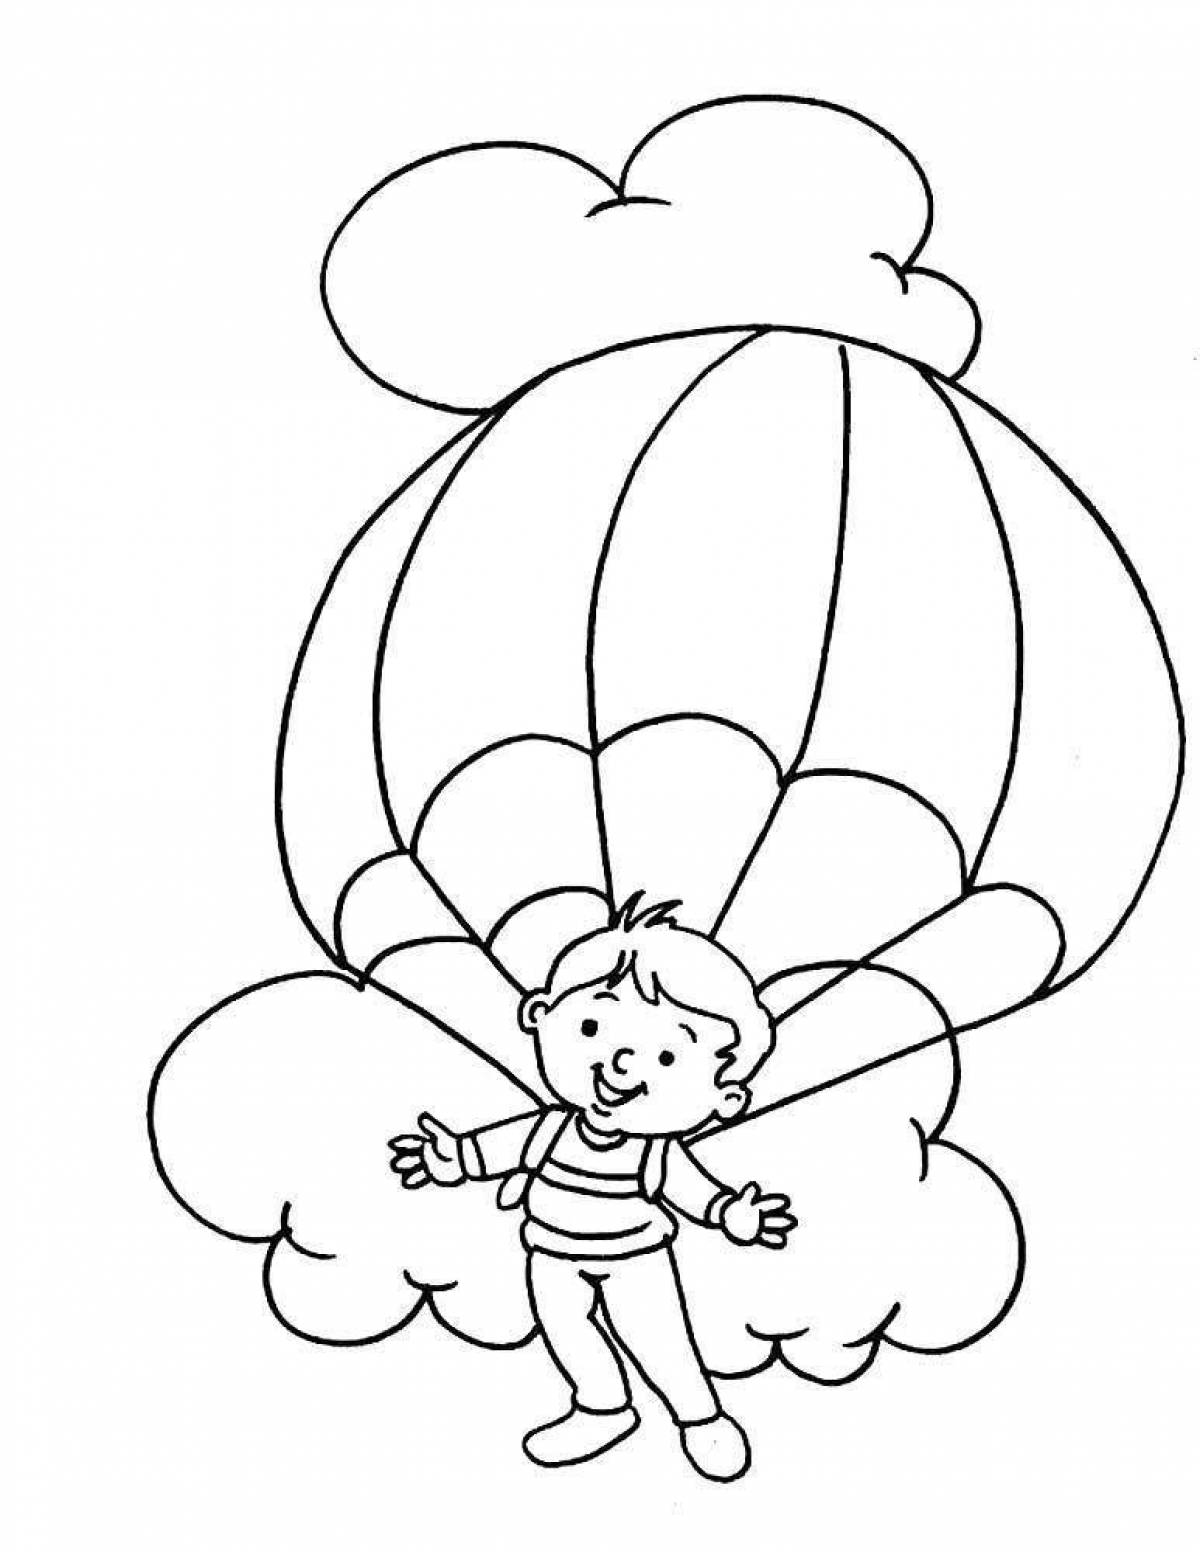 Acrobatic skydiver coloring page